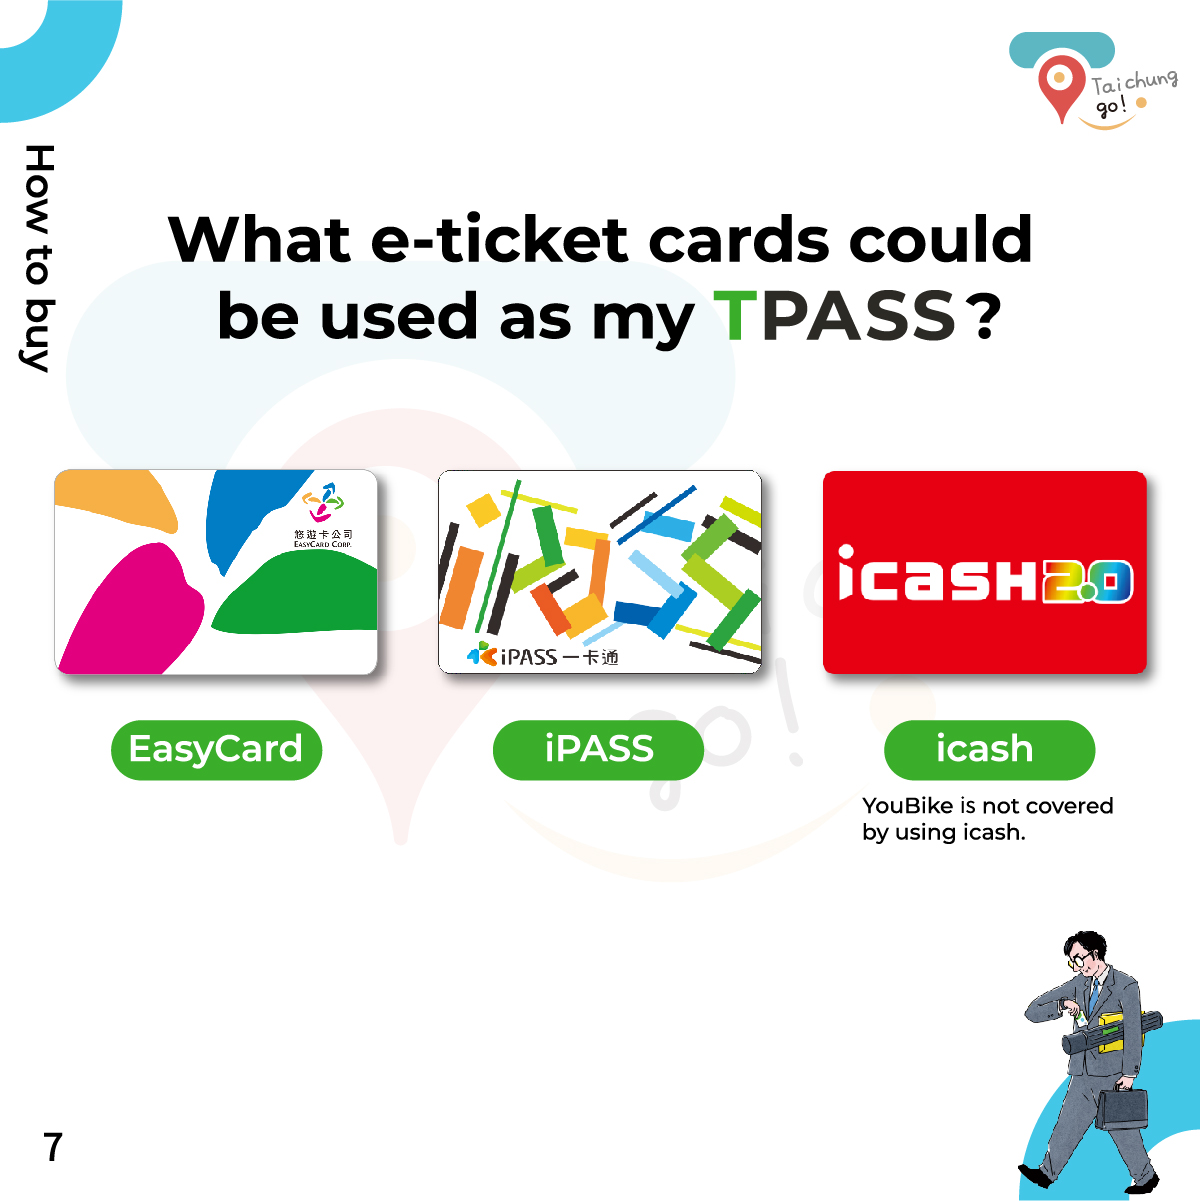 EasyCard,iPass and icash can be used as my TPASS but Taiwan Railway and YouBike are not covered by using icash.